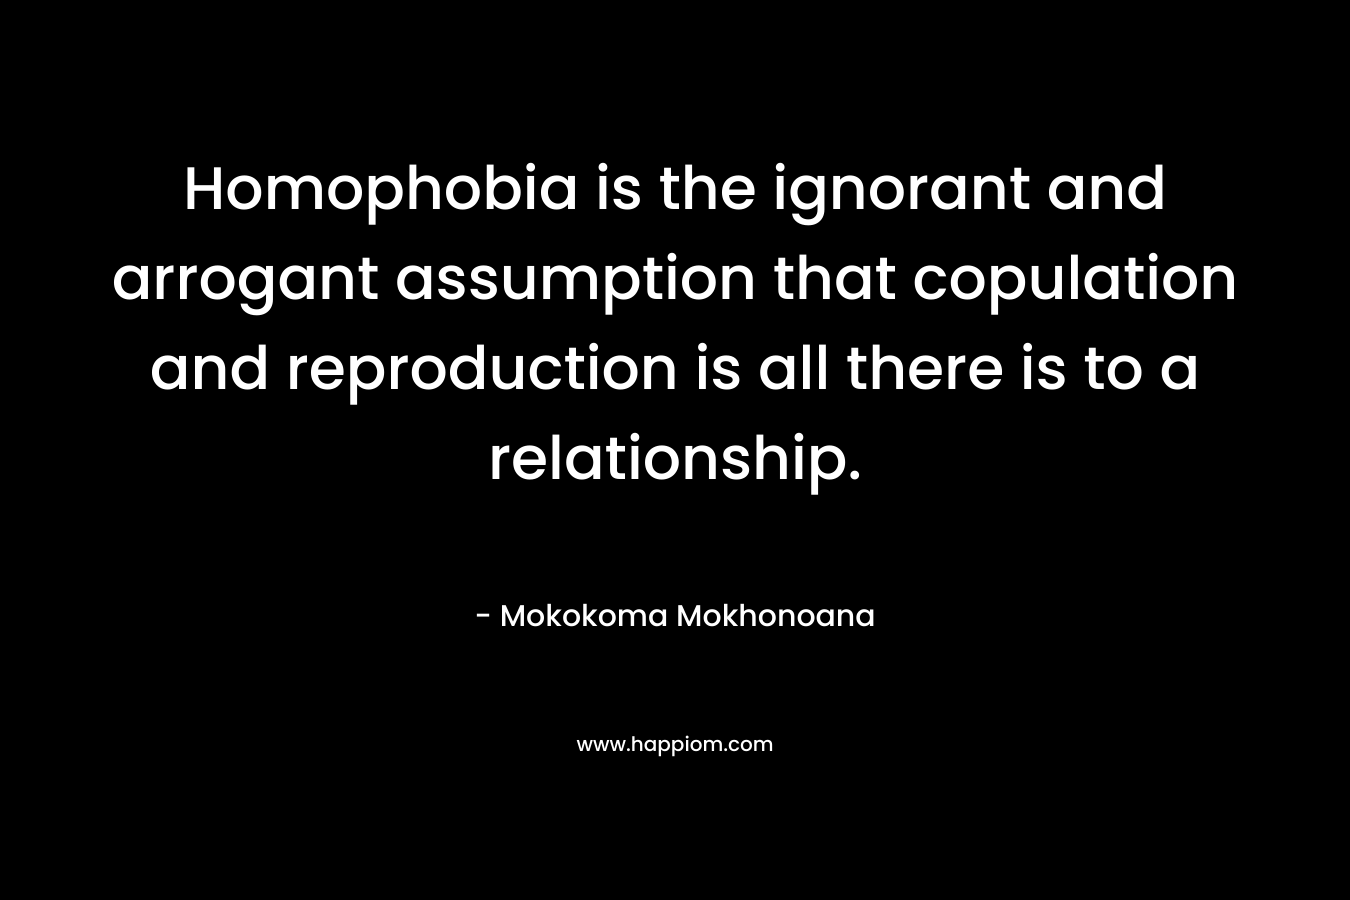 Homophobia is the ignorant and arrogant assumption that copulation and reproduction is all there is to a relationship. – Mokokoma Mokhonoana